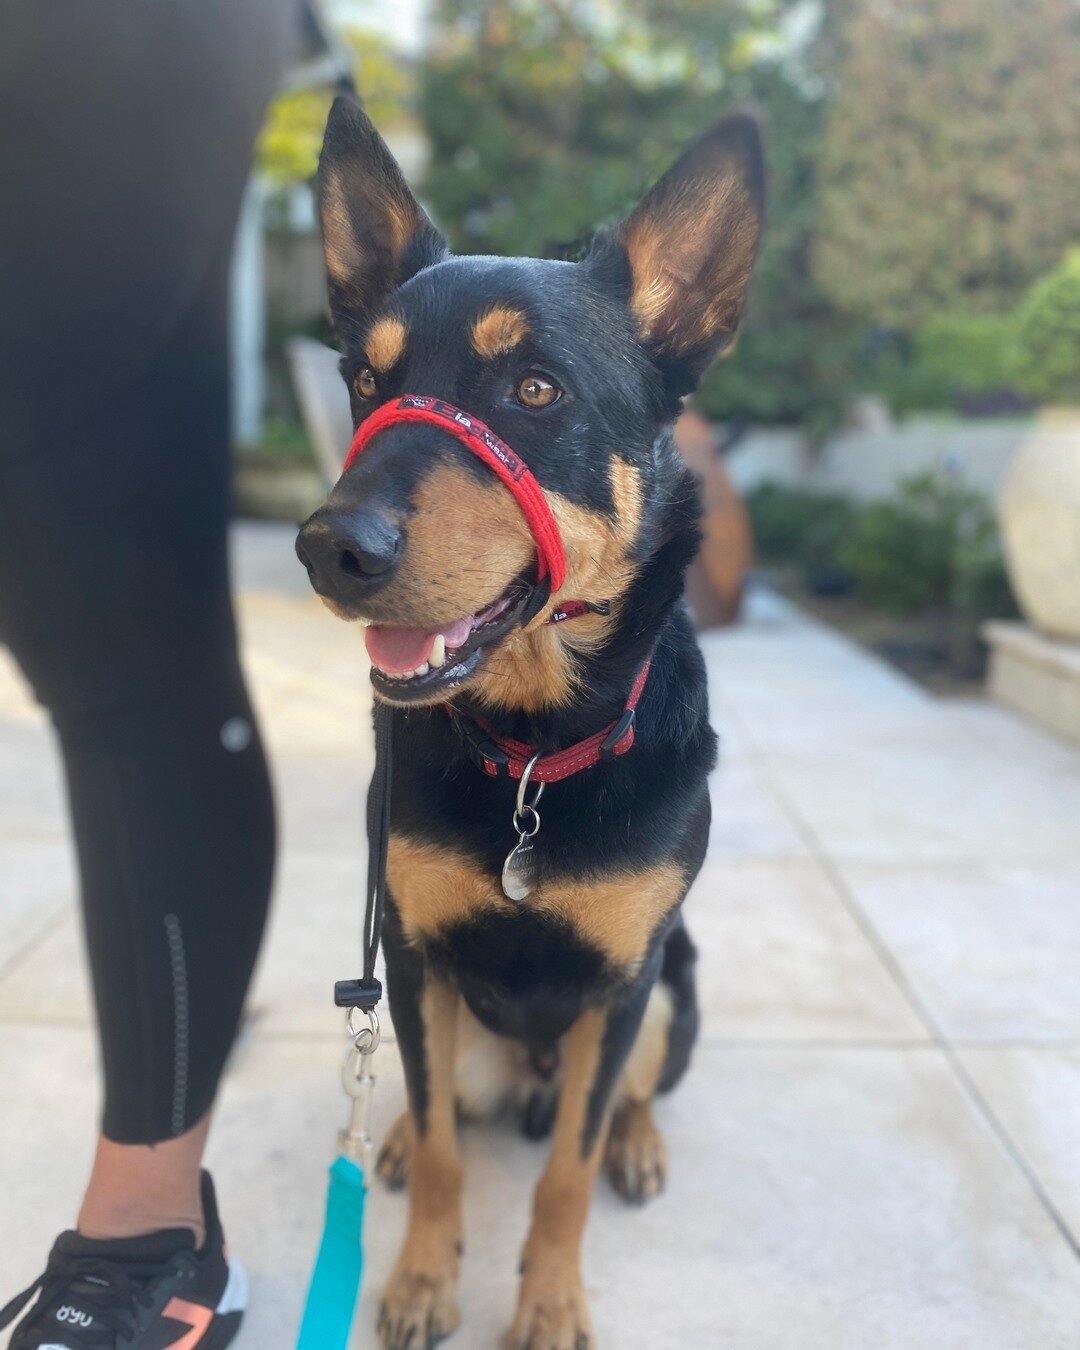 Marty loving his first session with Wagging School! ⠀⠀⠀⠀⠀⠀⠀⠀⠀
Welcome bud! 🥳 ⠀⠀⠀⠀⠀⠀⠀⠀⠀
⠀⠀⠀⠀⠀⠀⠀⠀⠀
⠀⠀⠀⠀⠀⠀⠀⠀⠀
⠀⠀⠀⠀⠀⠀⠀⠀⠀
#dogsofinstagram #dogstagram #doglover #dogsofinsta #doggy #doggo #dogsofig #doglove #dogs⠀⠀⠀⠀⠀⠀⠀⠀⠀
 #dogtraining #obediencetraining